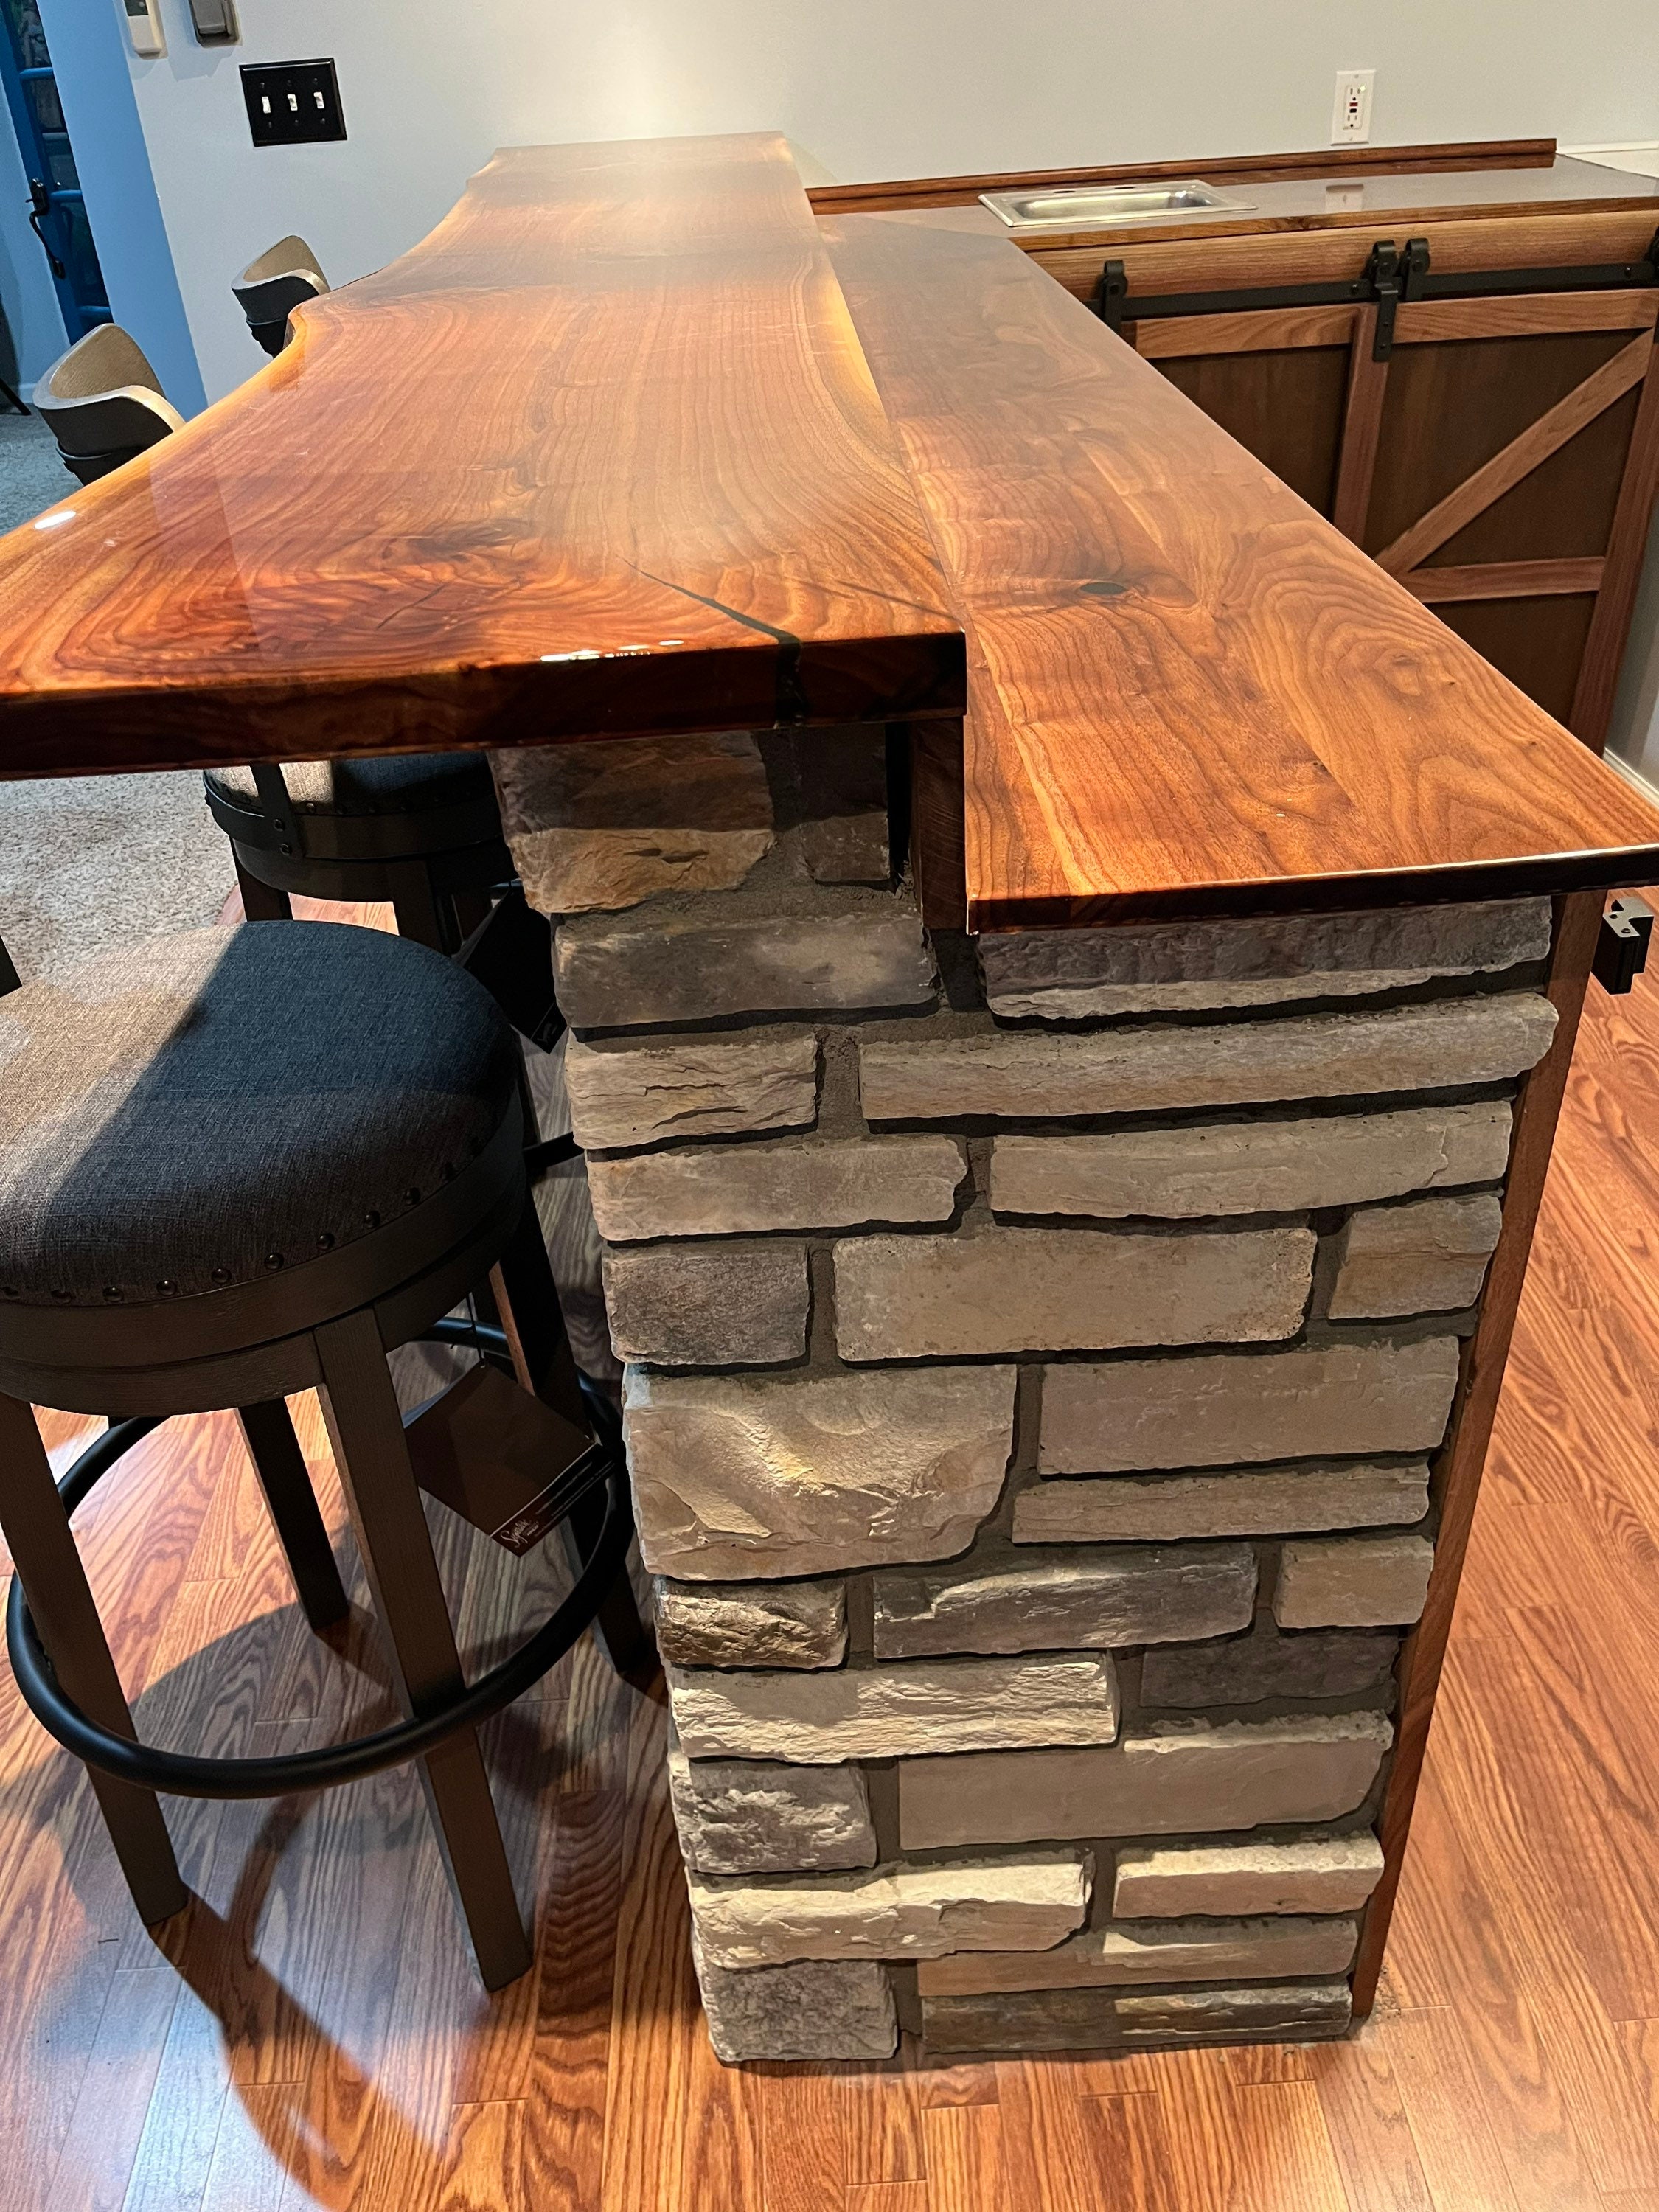 Which Stone is Best for an Indoor Bar Top?